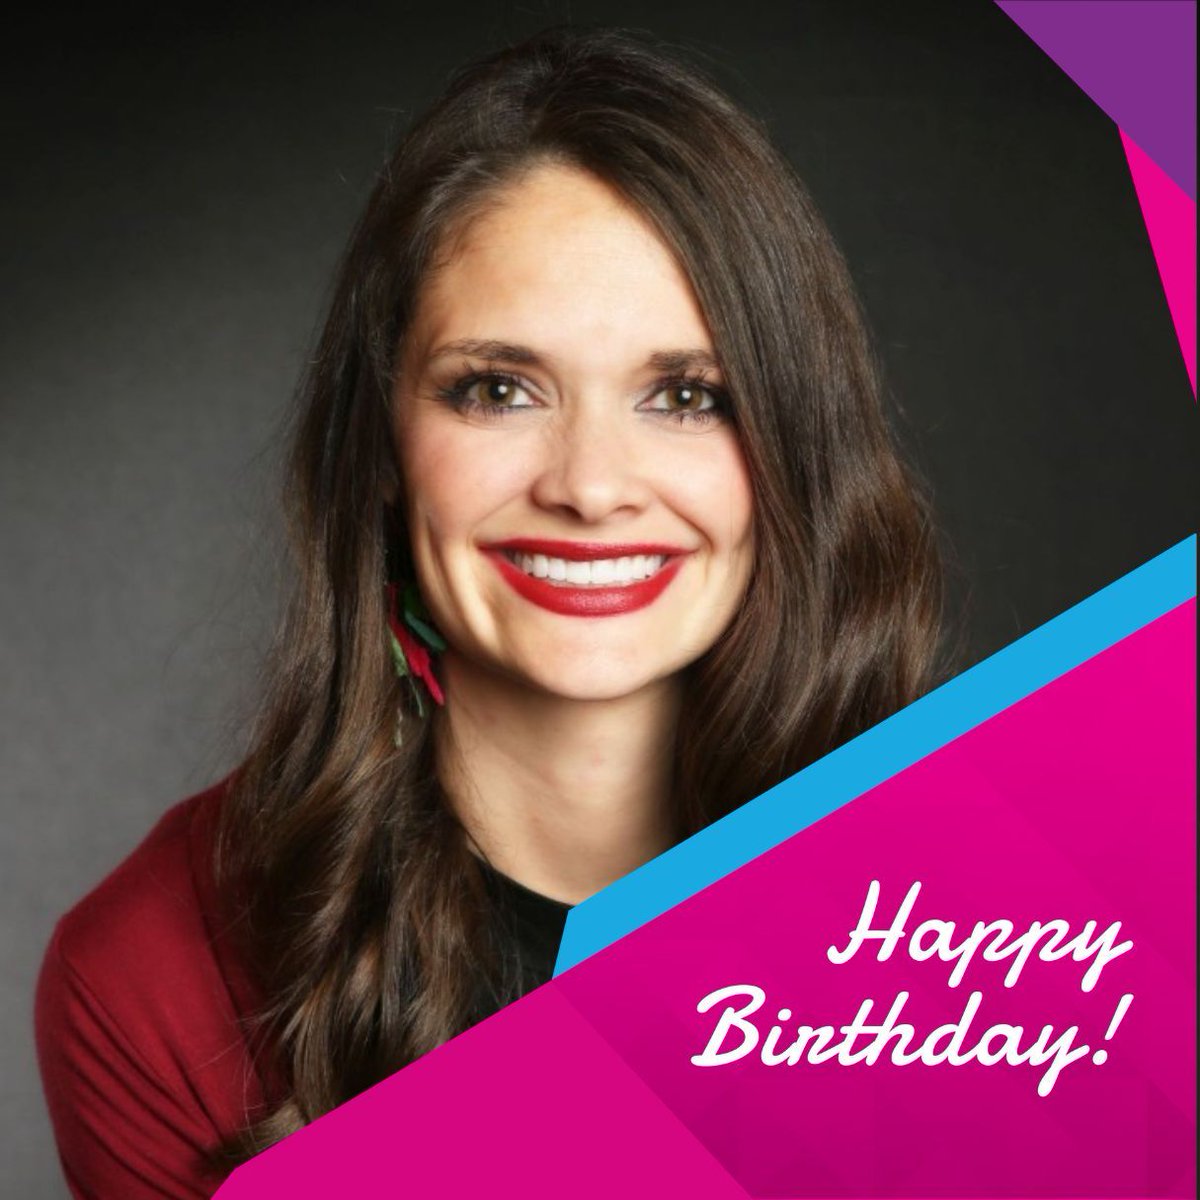 Wishing a fantastic birthday to our Director of Corporate & Economic Development, Caroline Salcedo!🎉 Hope your day is filled with joy and celebration, Caroline!💜

#NAWBOSA